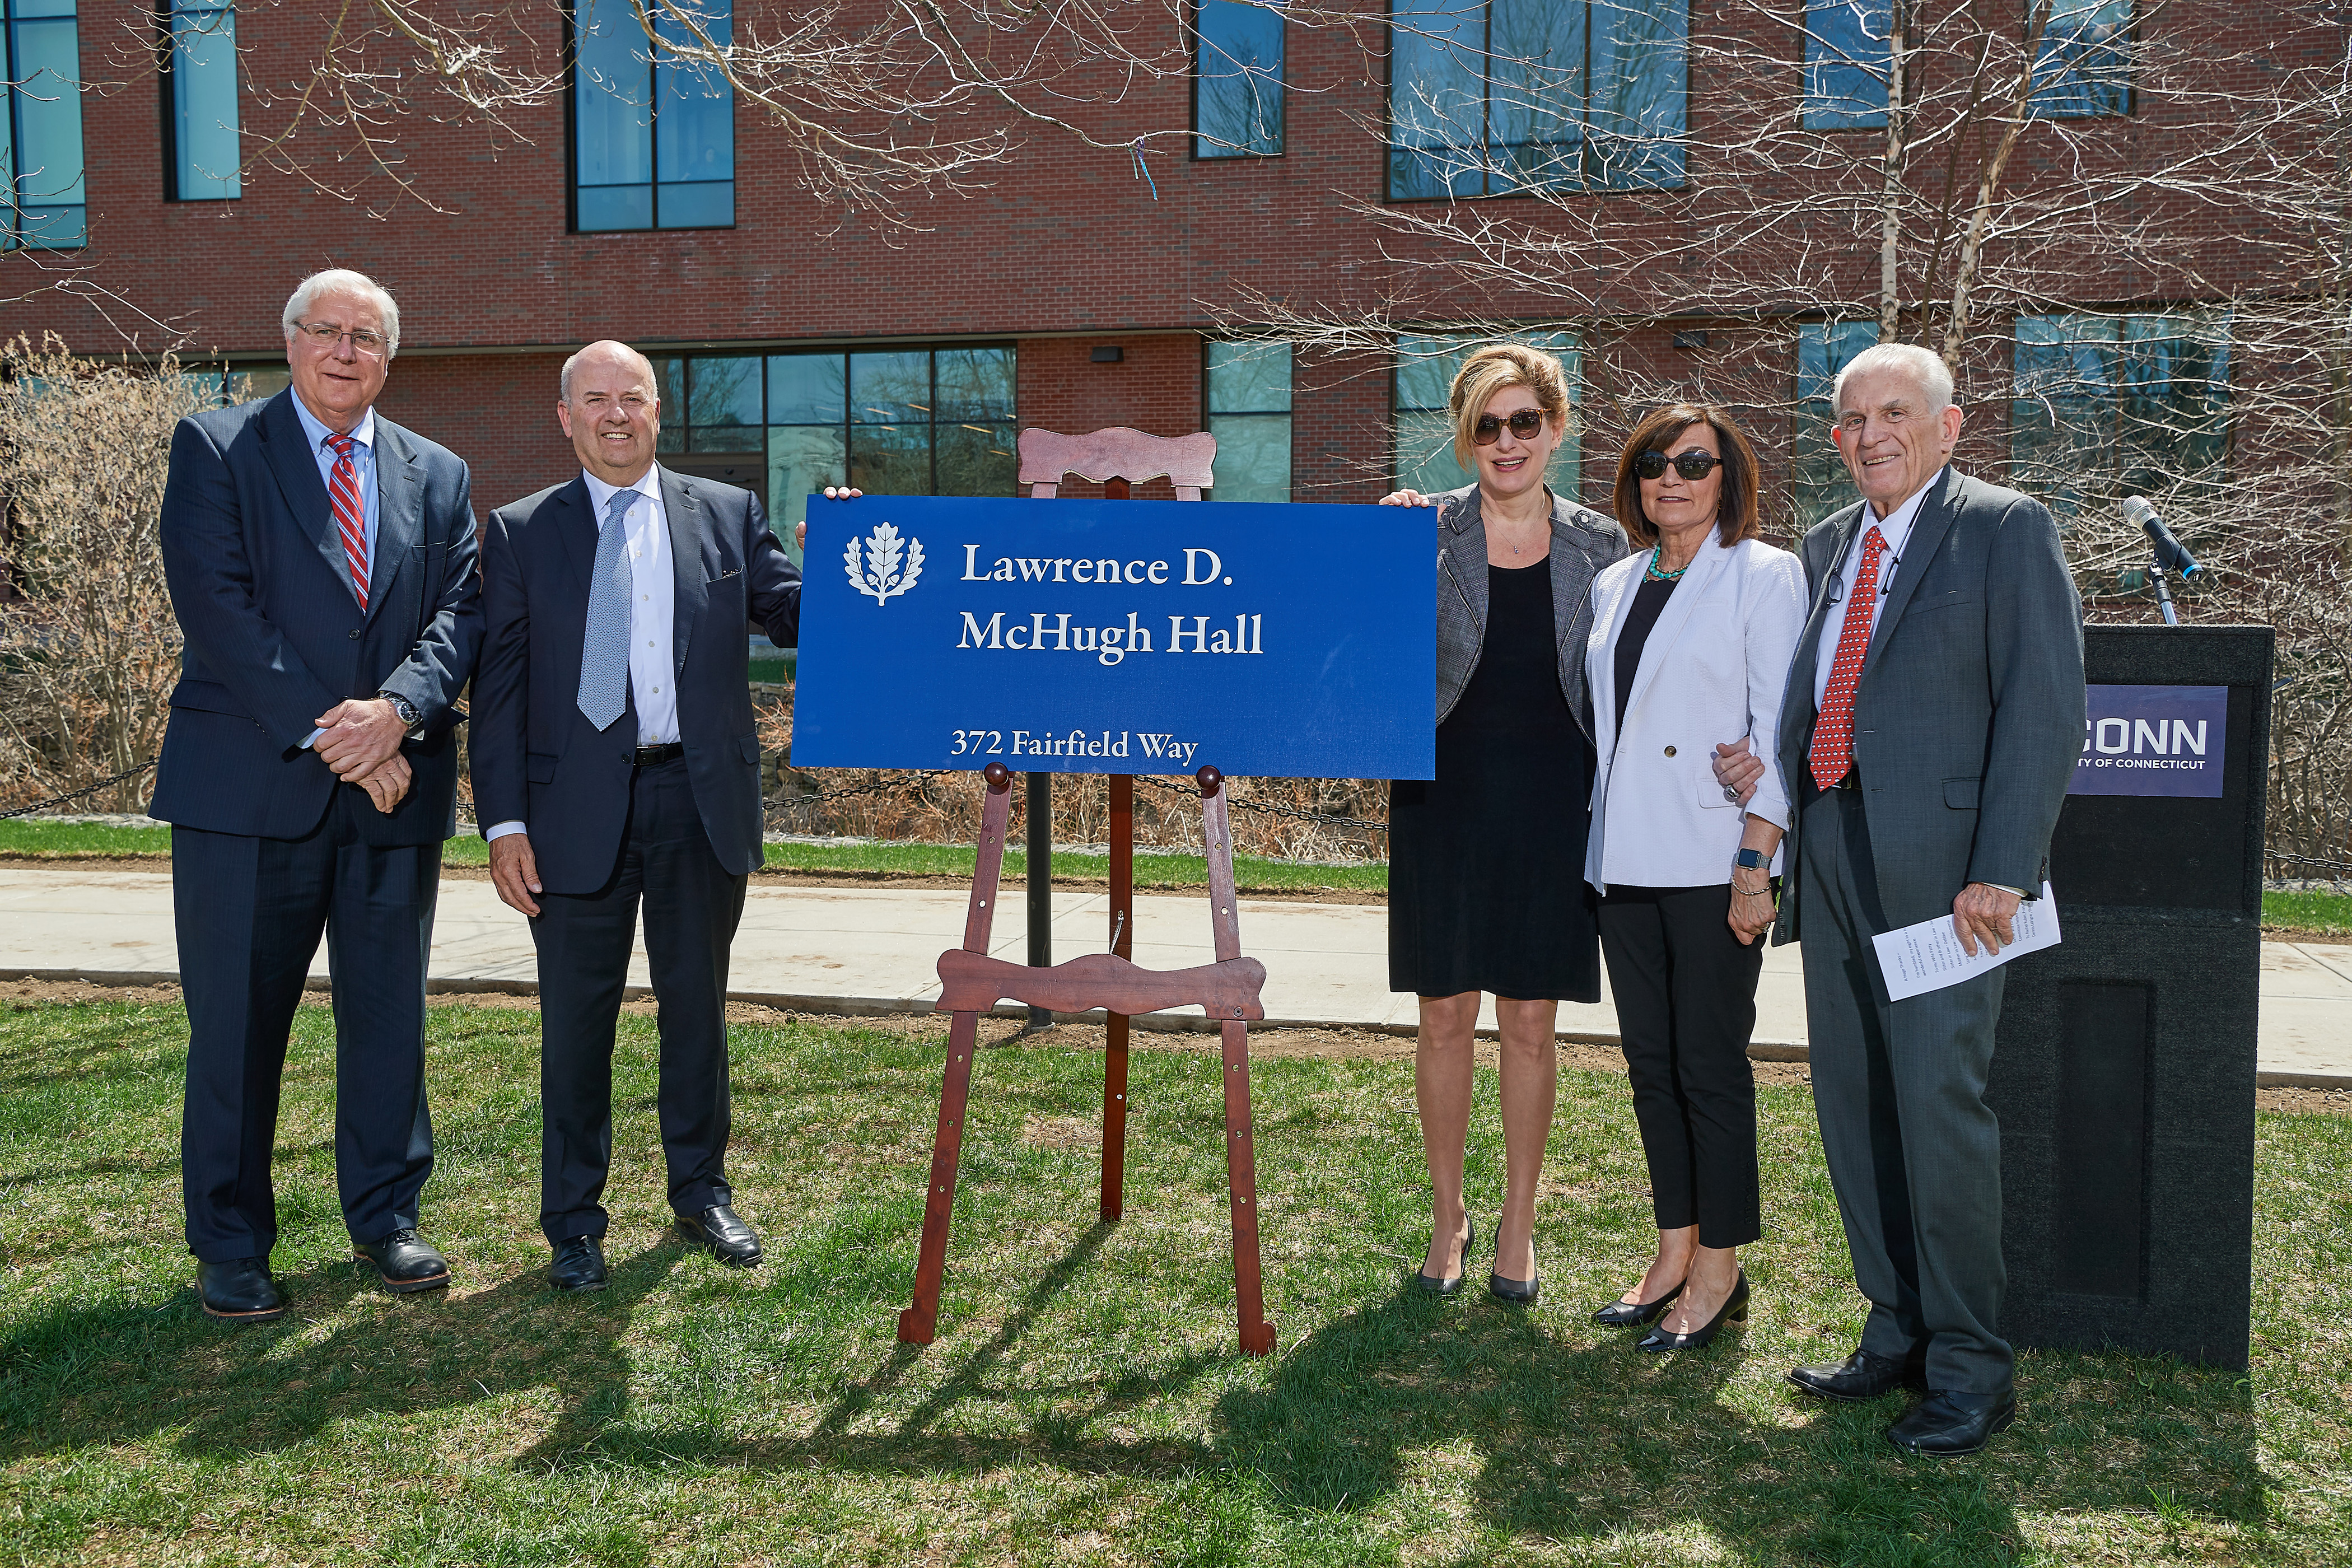 From left, Thomas Ritter '77 JD, Thomas Kruger, President Susan Herbst, Patricia McHugh, and Larry McHugh at the ceremony held to celebrate the naming of Lawrence D. McHugh Hall on May 2, 2018. (Peter Morenus/UConn Photo)